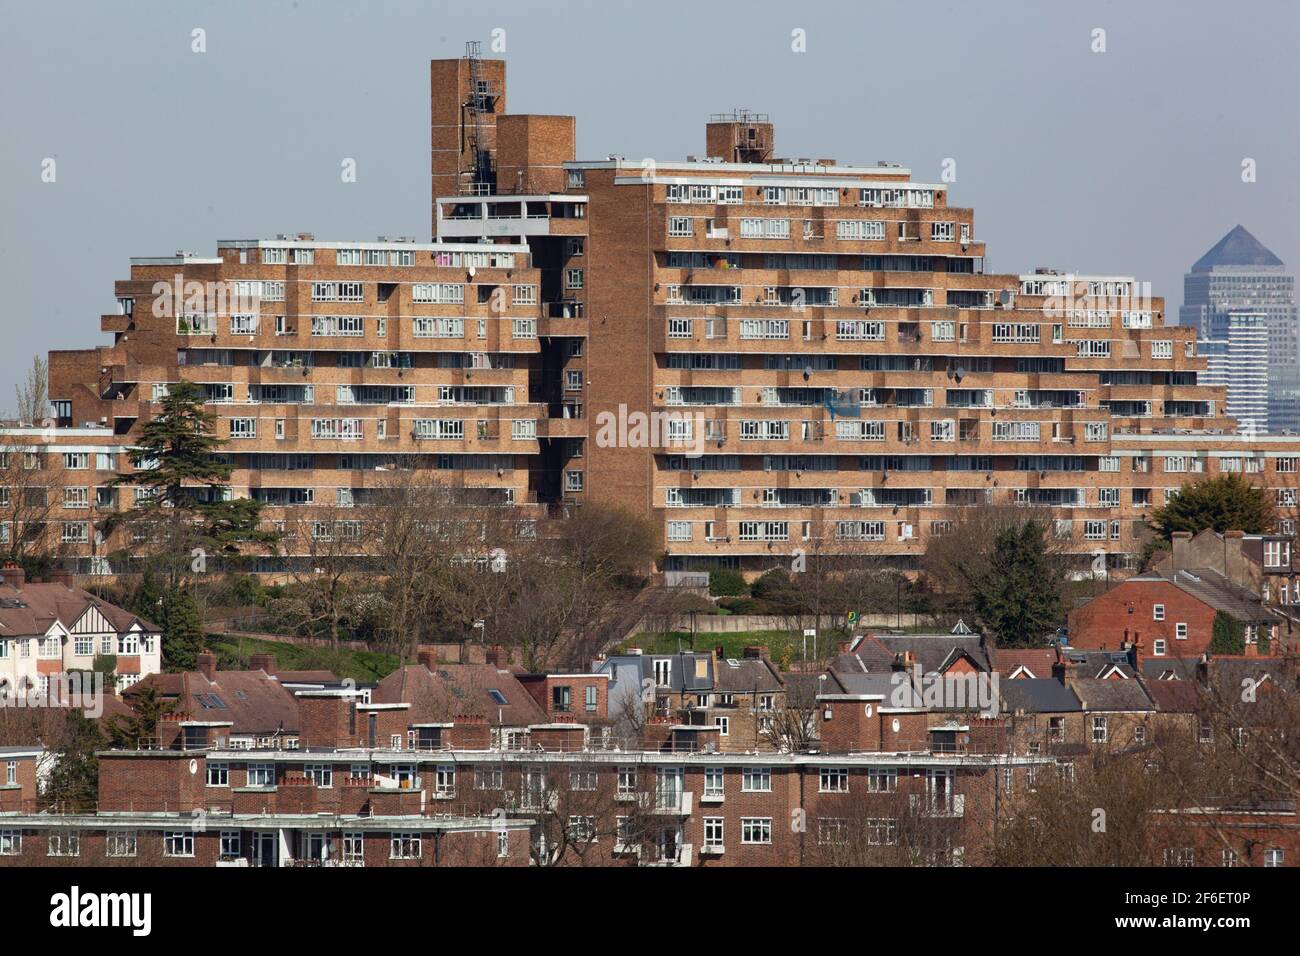 Dawson's Heights, a ziggurat-shaped 12-story housing estate in East Dulwich, was designed in 1966 by architect Kate Macintosh for Southwark Council. Stock Photo